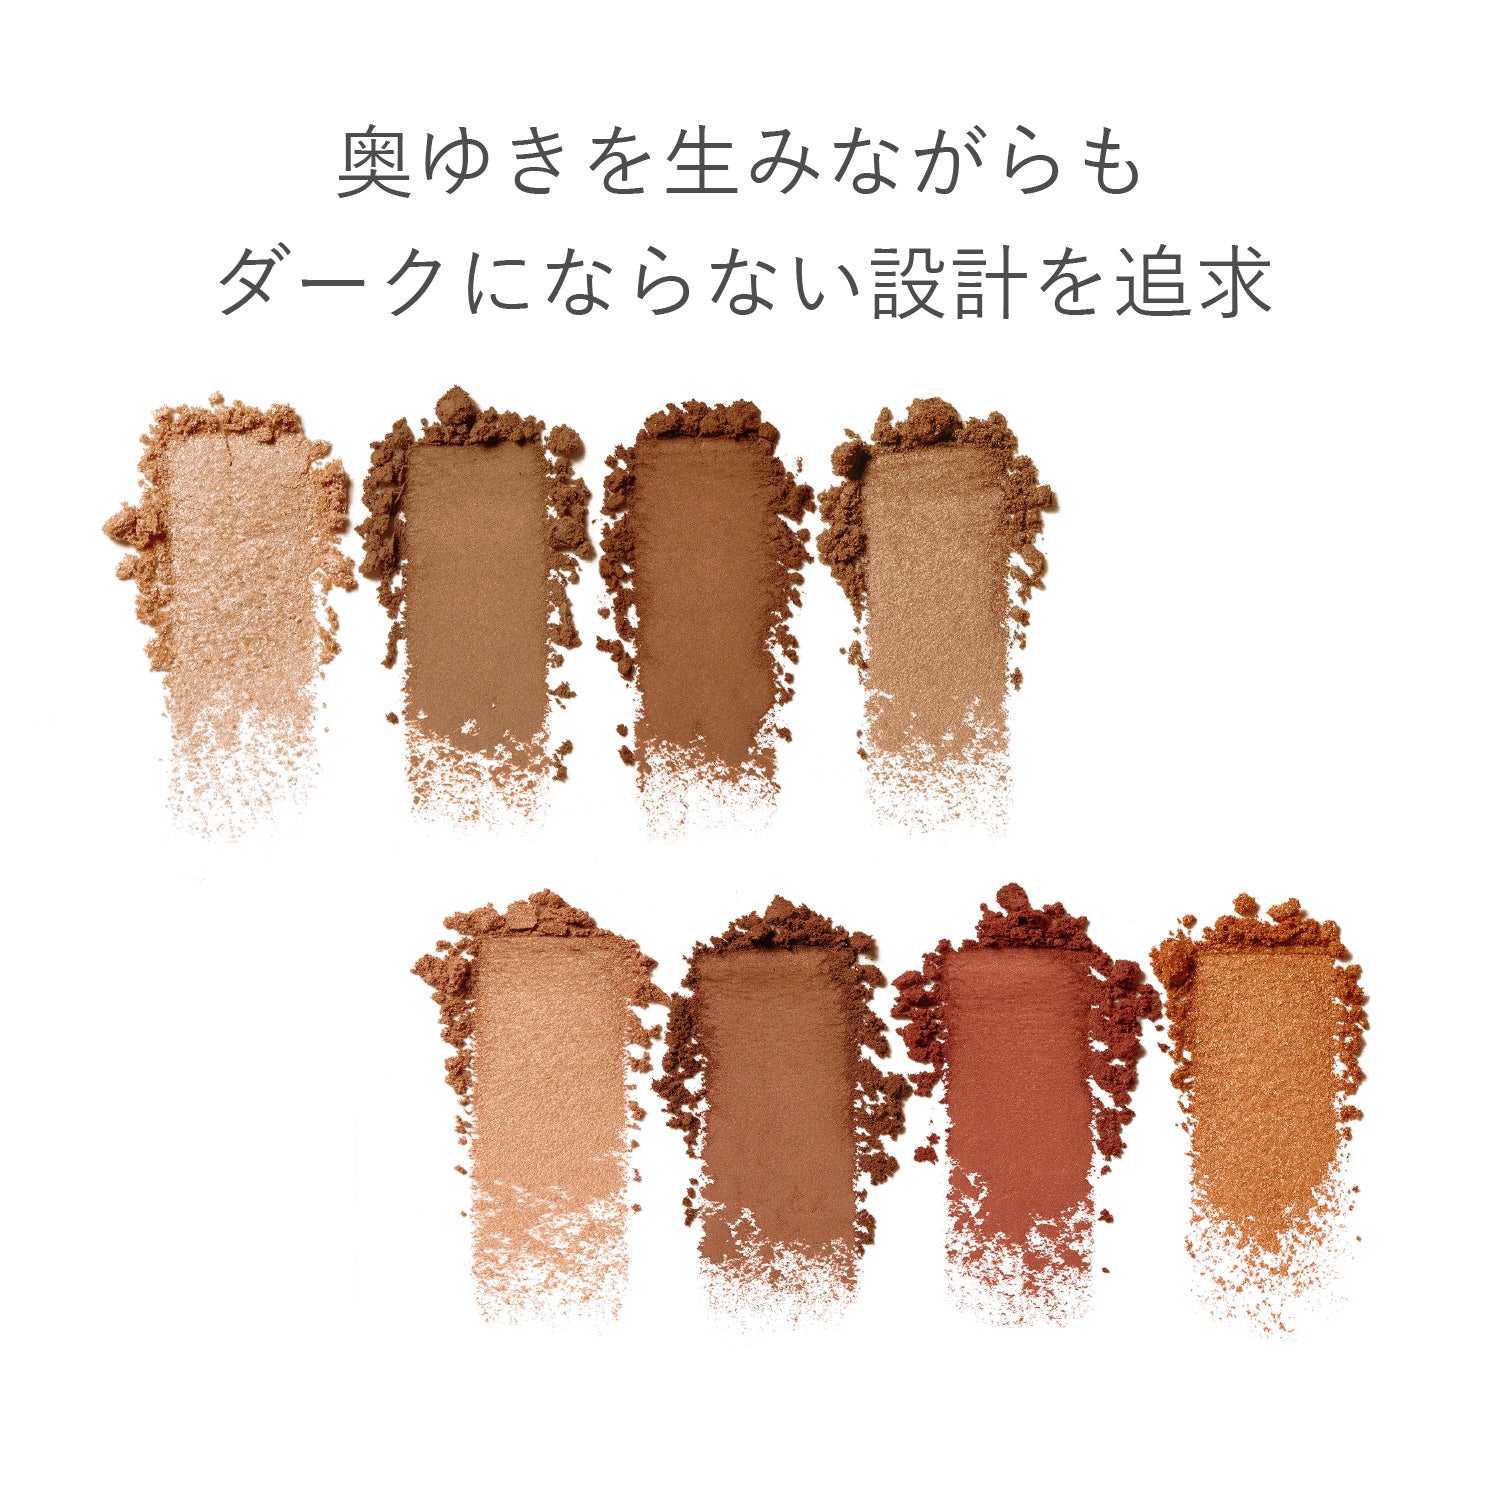 RMK Synchromatic Eyeshadow Palette (Limited Colors)